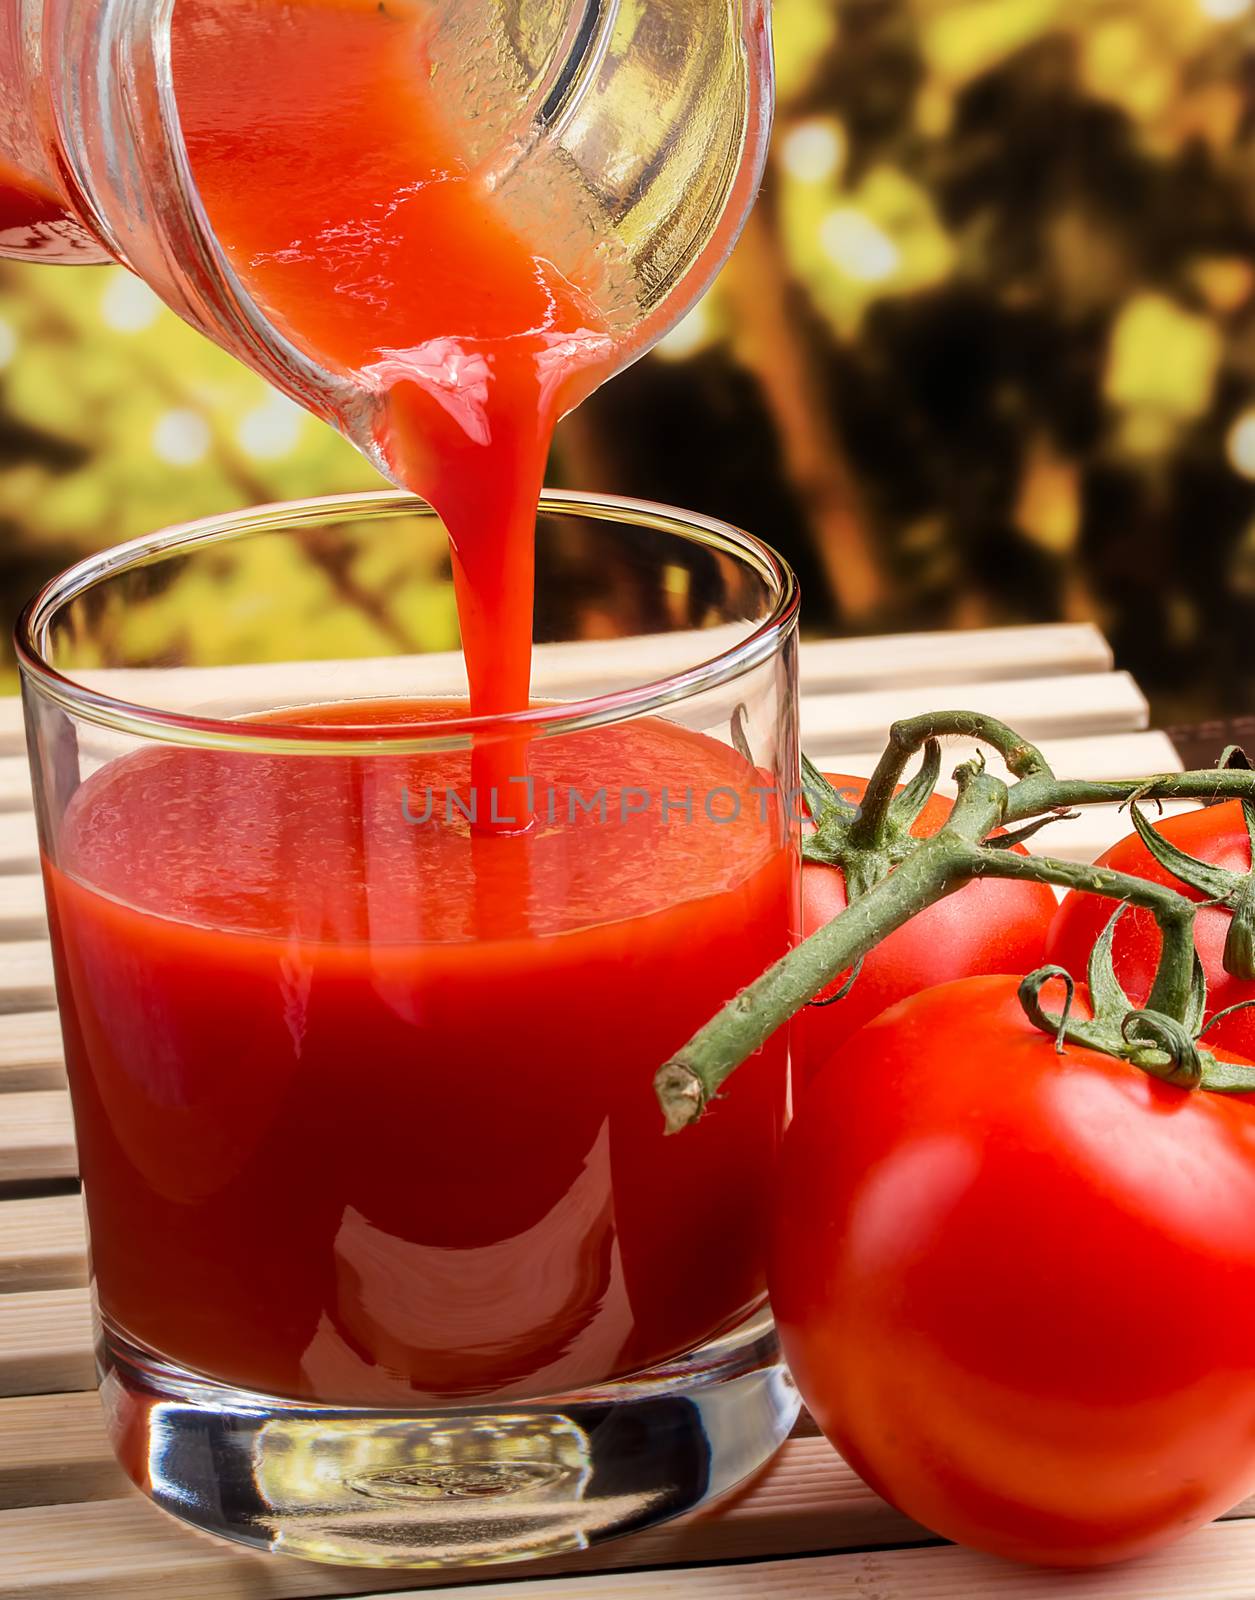 Tomatoes And Juice Showing Refreshing Drinks And Drink